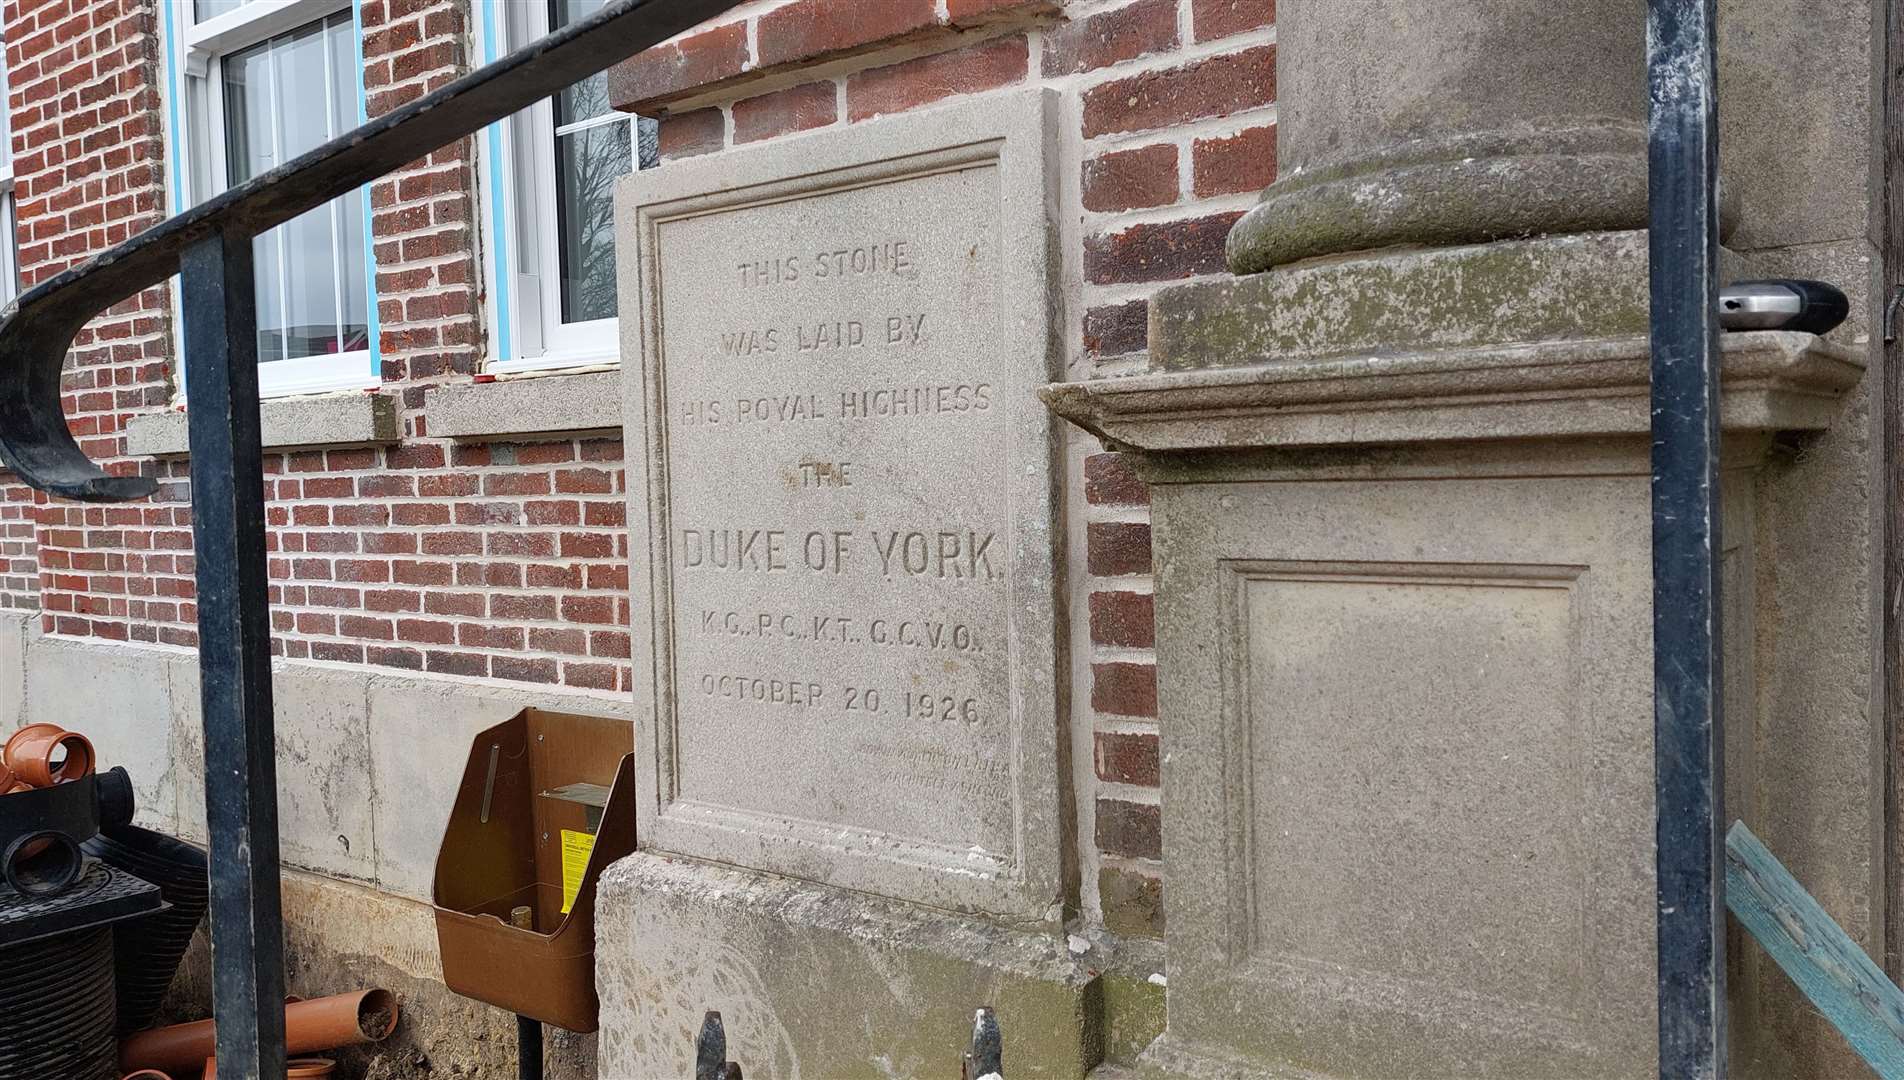 The stone laid by King George VI and the Queen Mother in 1926 remains untouched